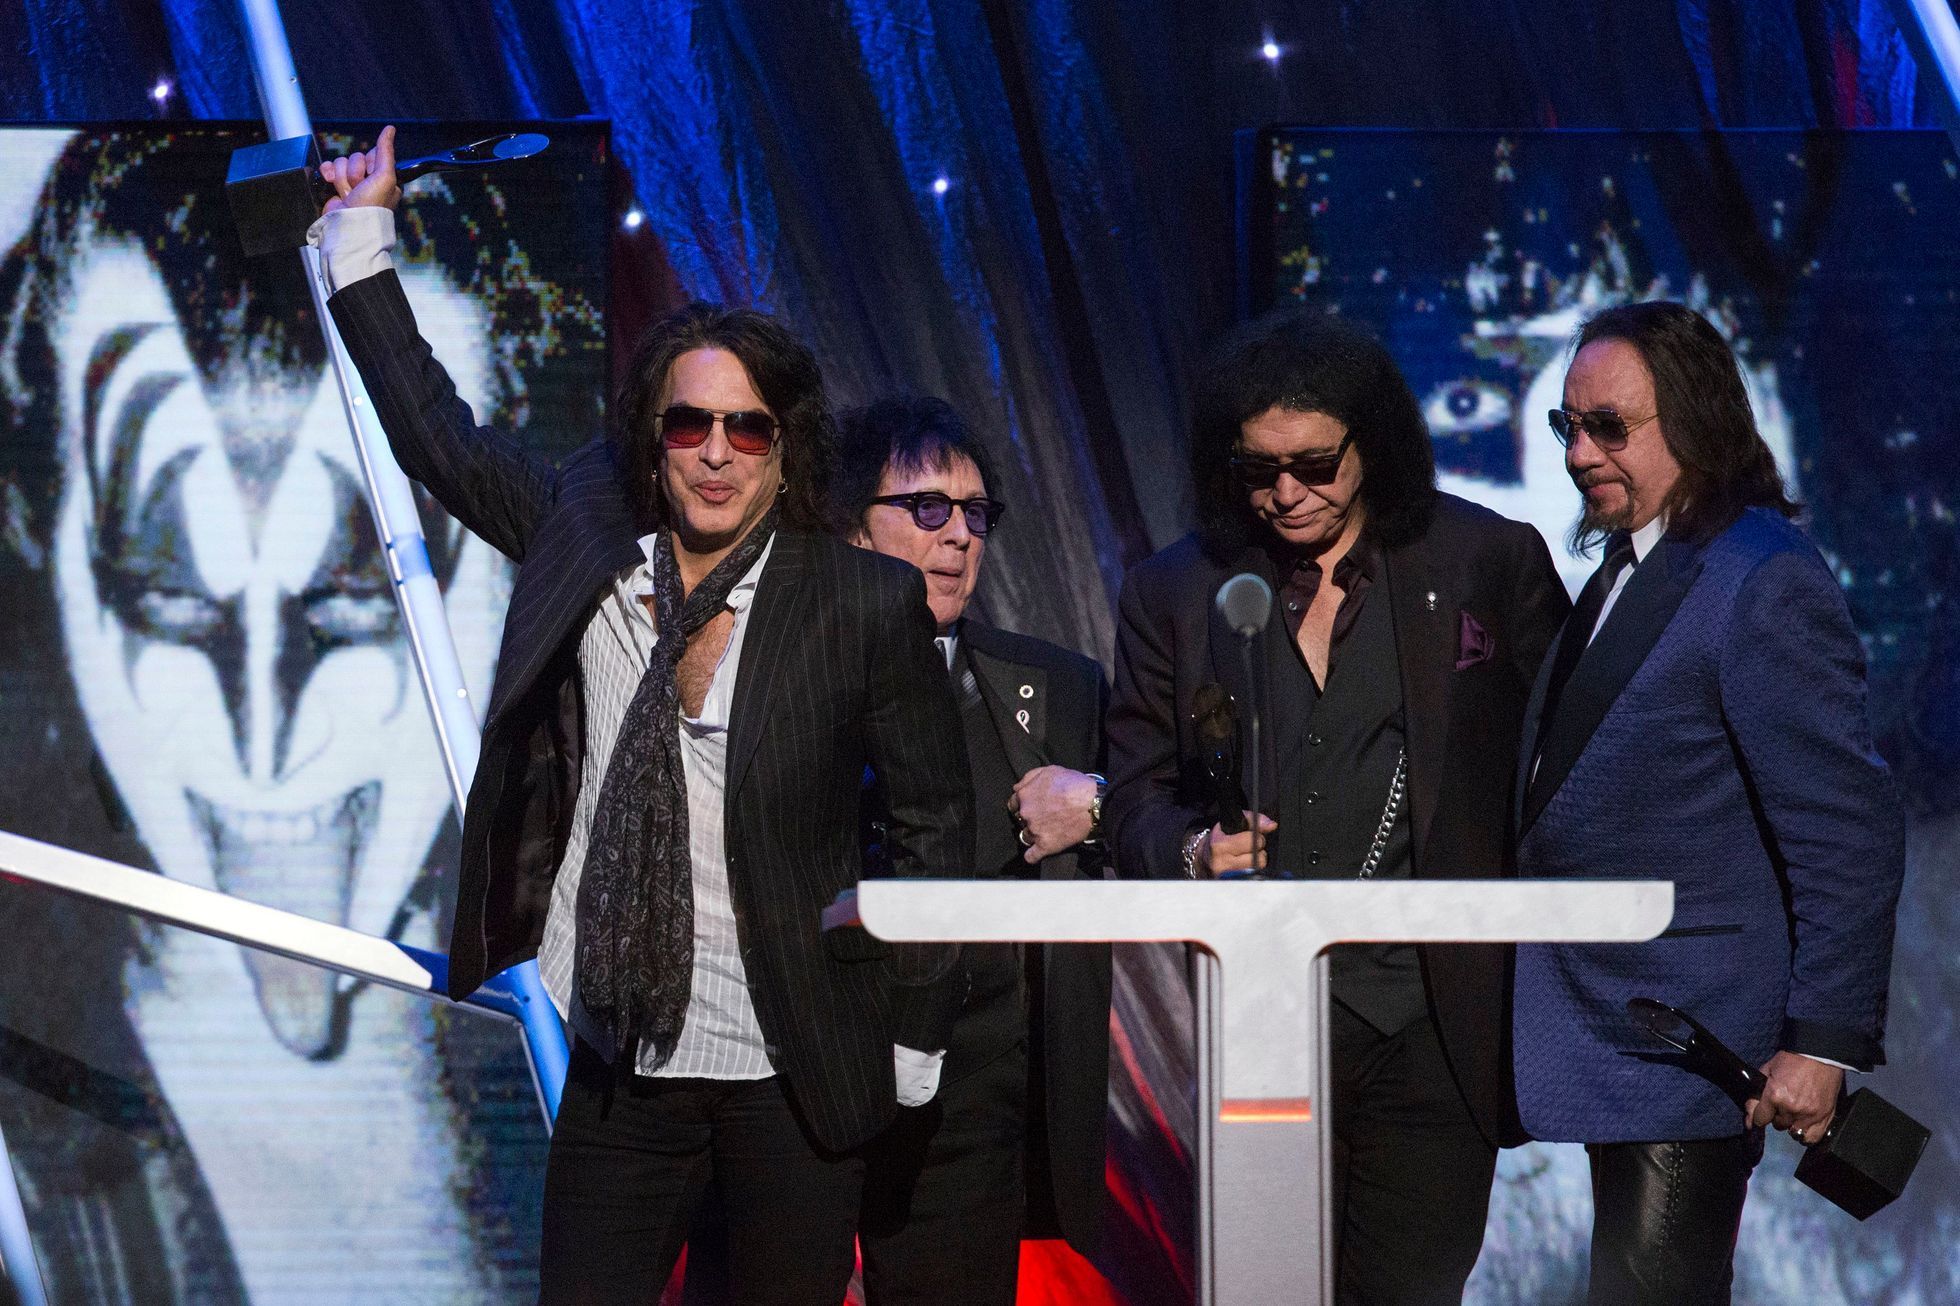 Kiss band member Stanley holds up their award after rock band was inducted at 29th annual Rock and Roll Hall of Fame Induction Ceremony in Brooklyn, New York